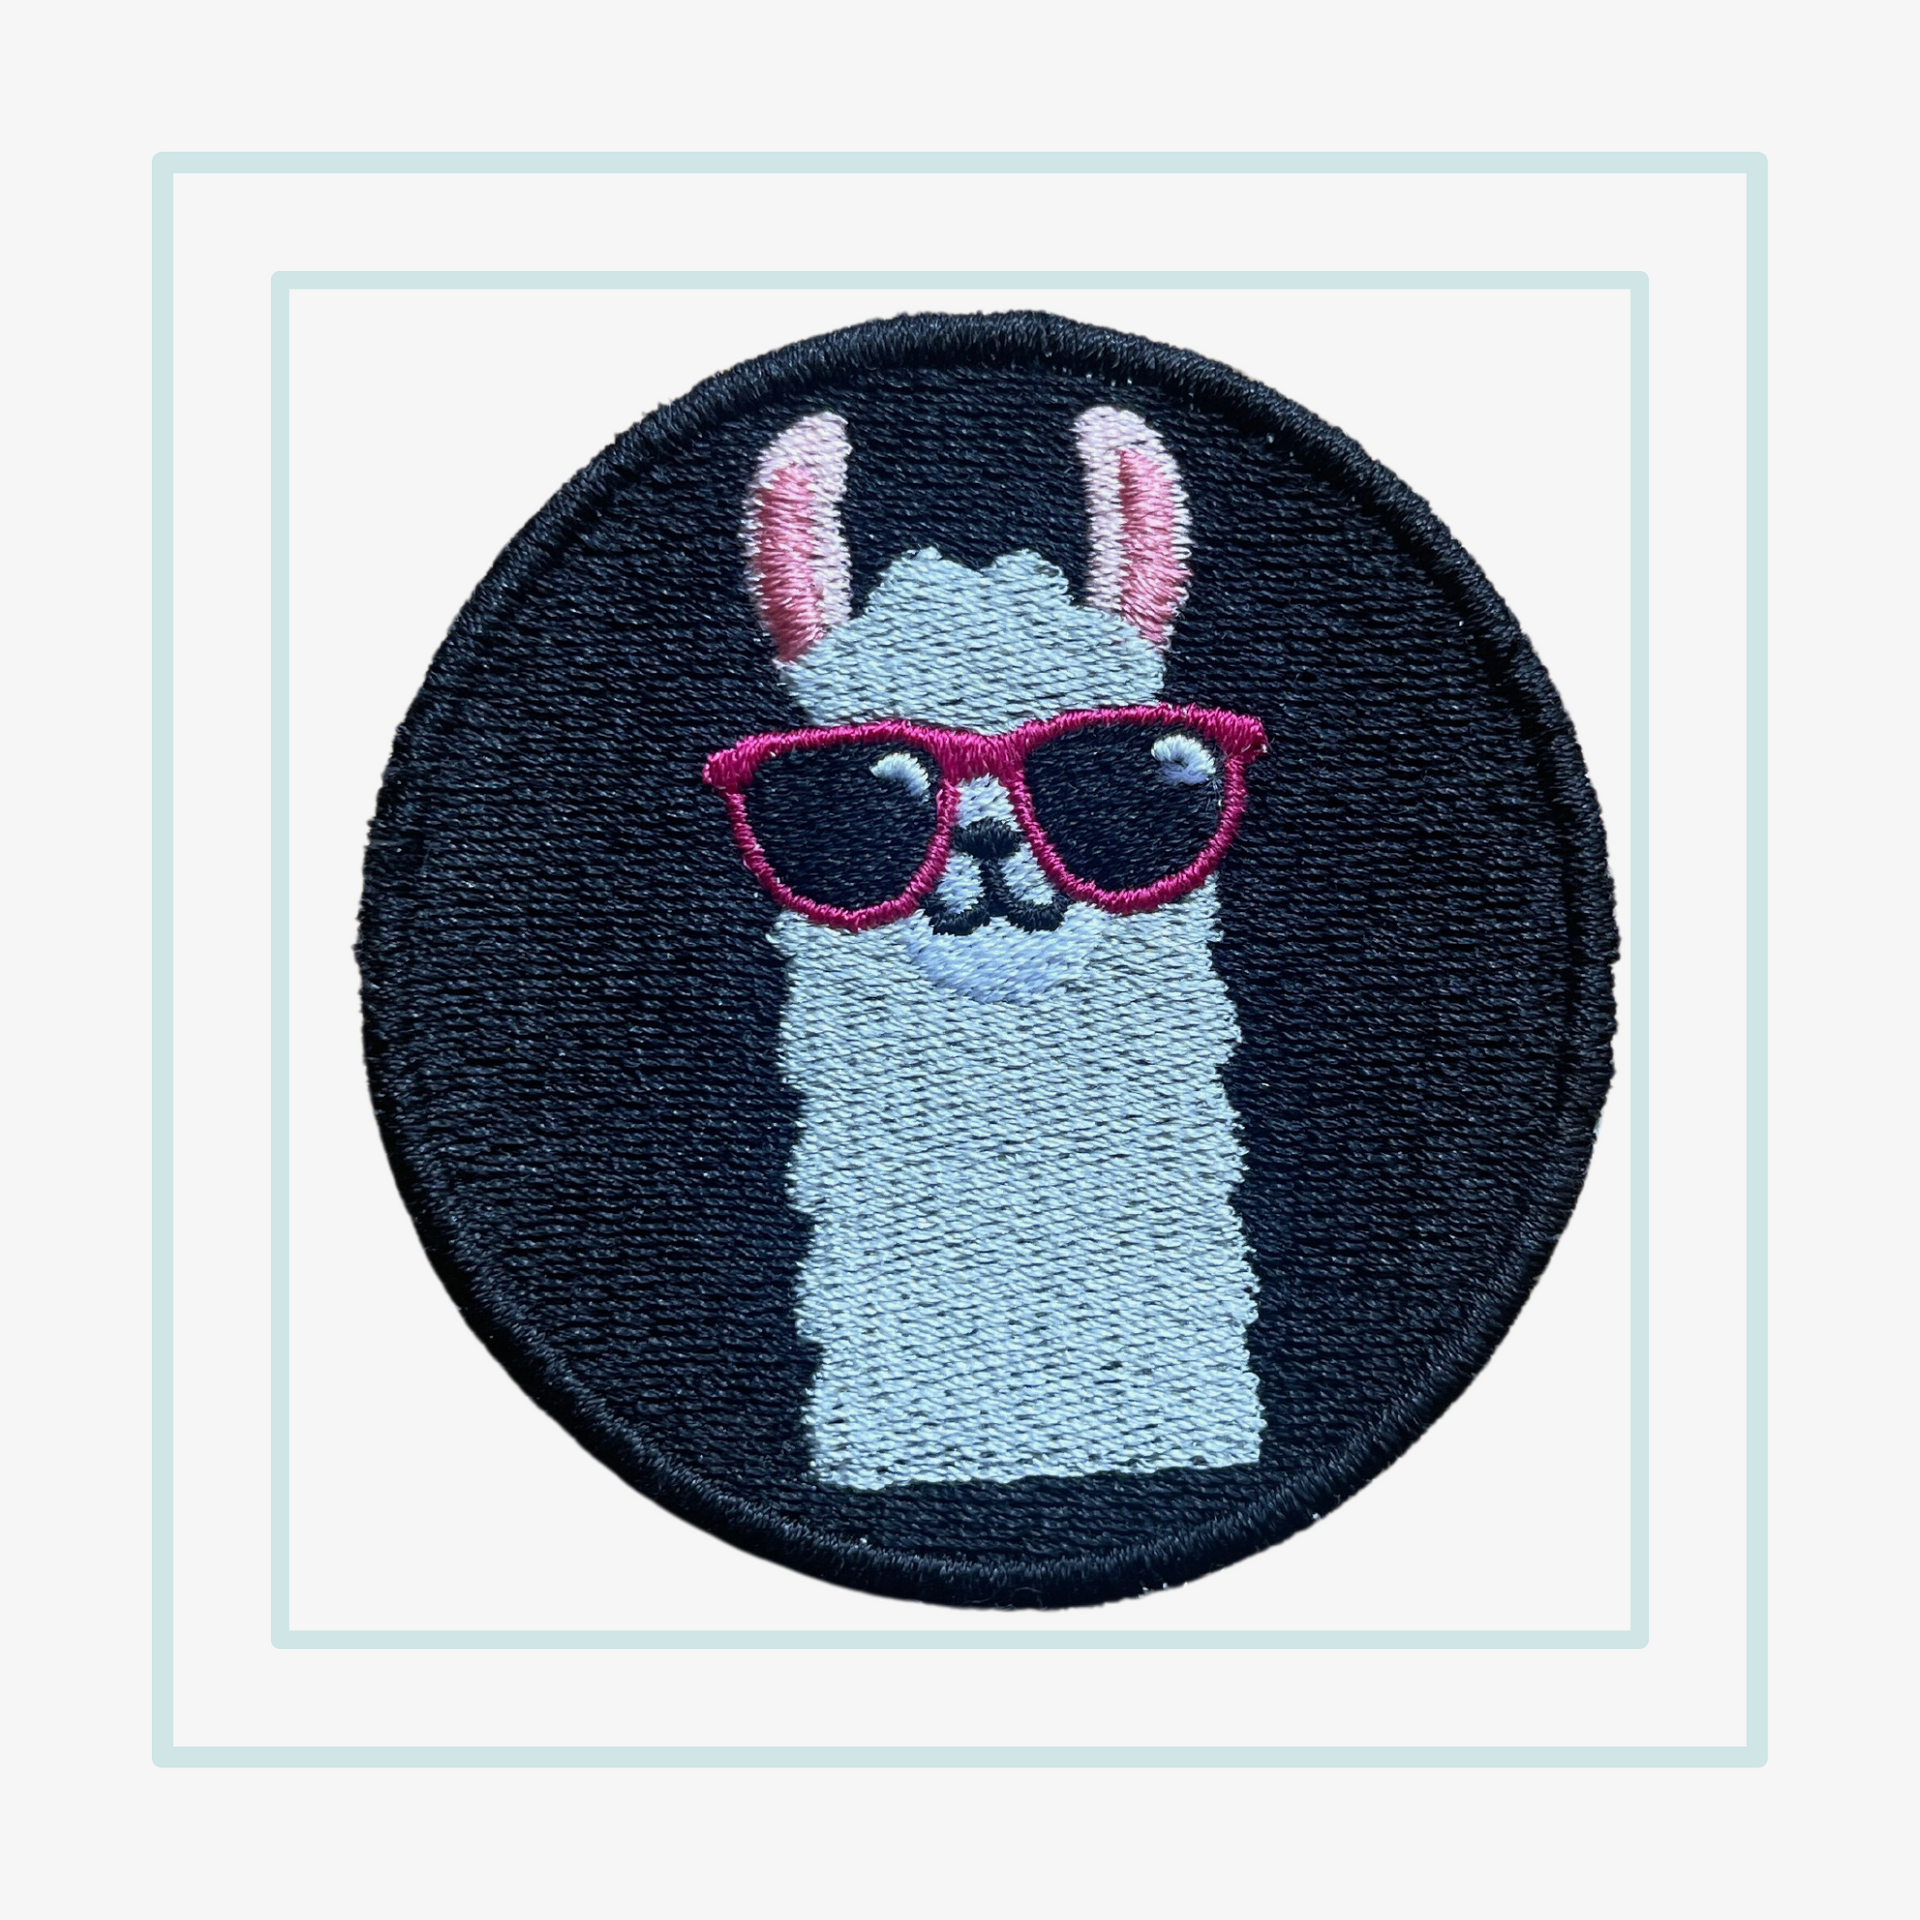 Succulent Alpaca Embroidered Iron-On Patch - Llama Patch For Jeans